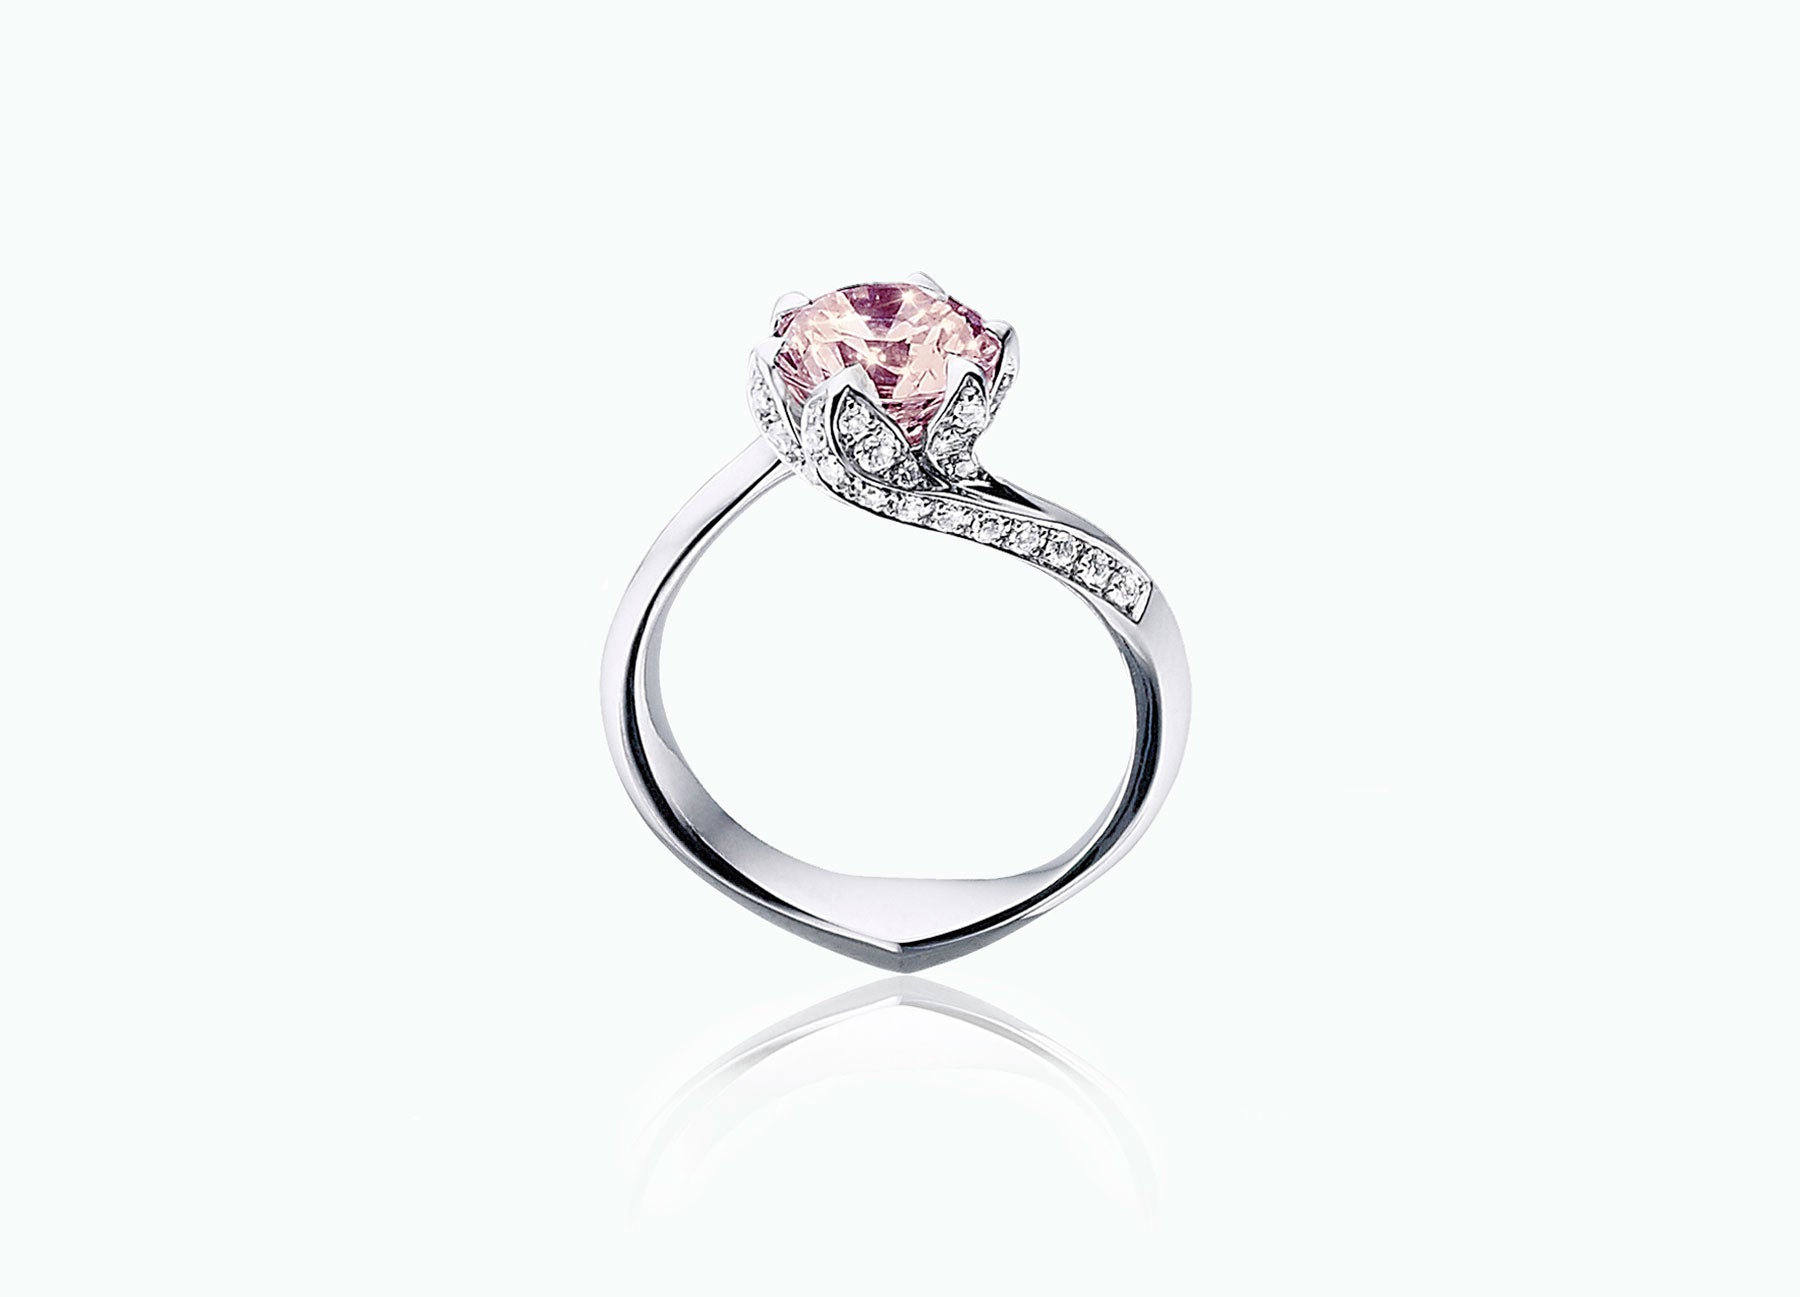 Lily Pad White Gold Unique Engagement Ring with White Diamonds and a Morganite Centre Stone